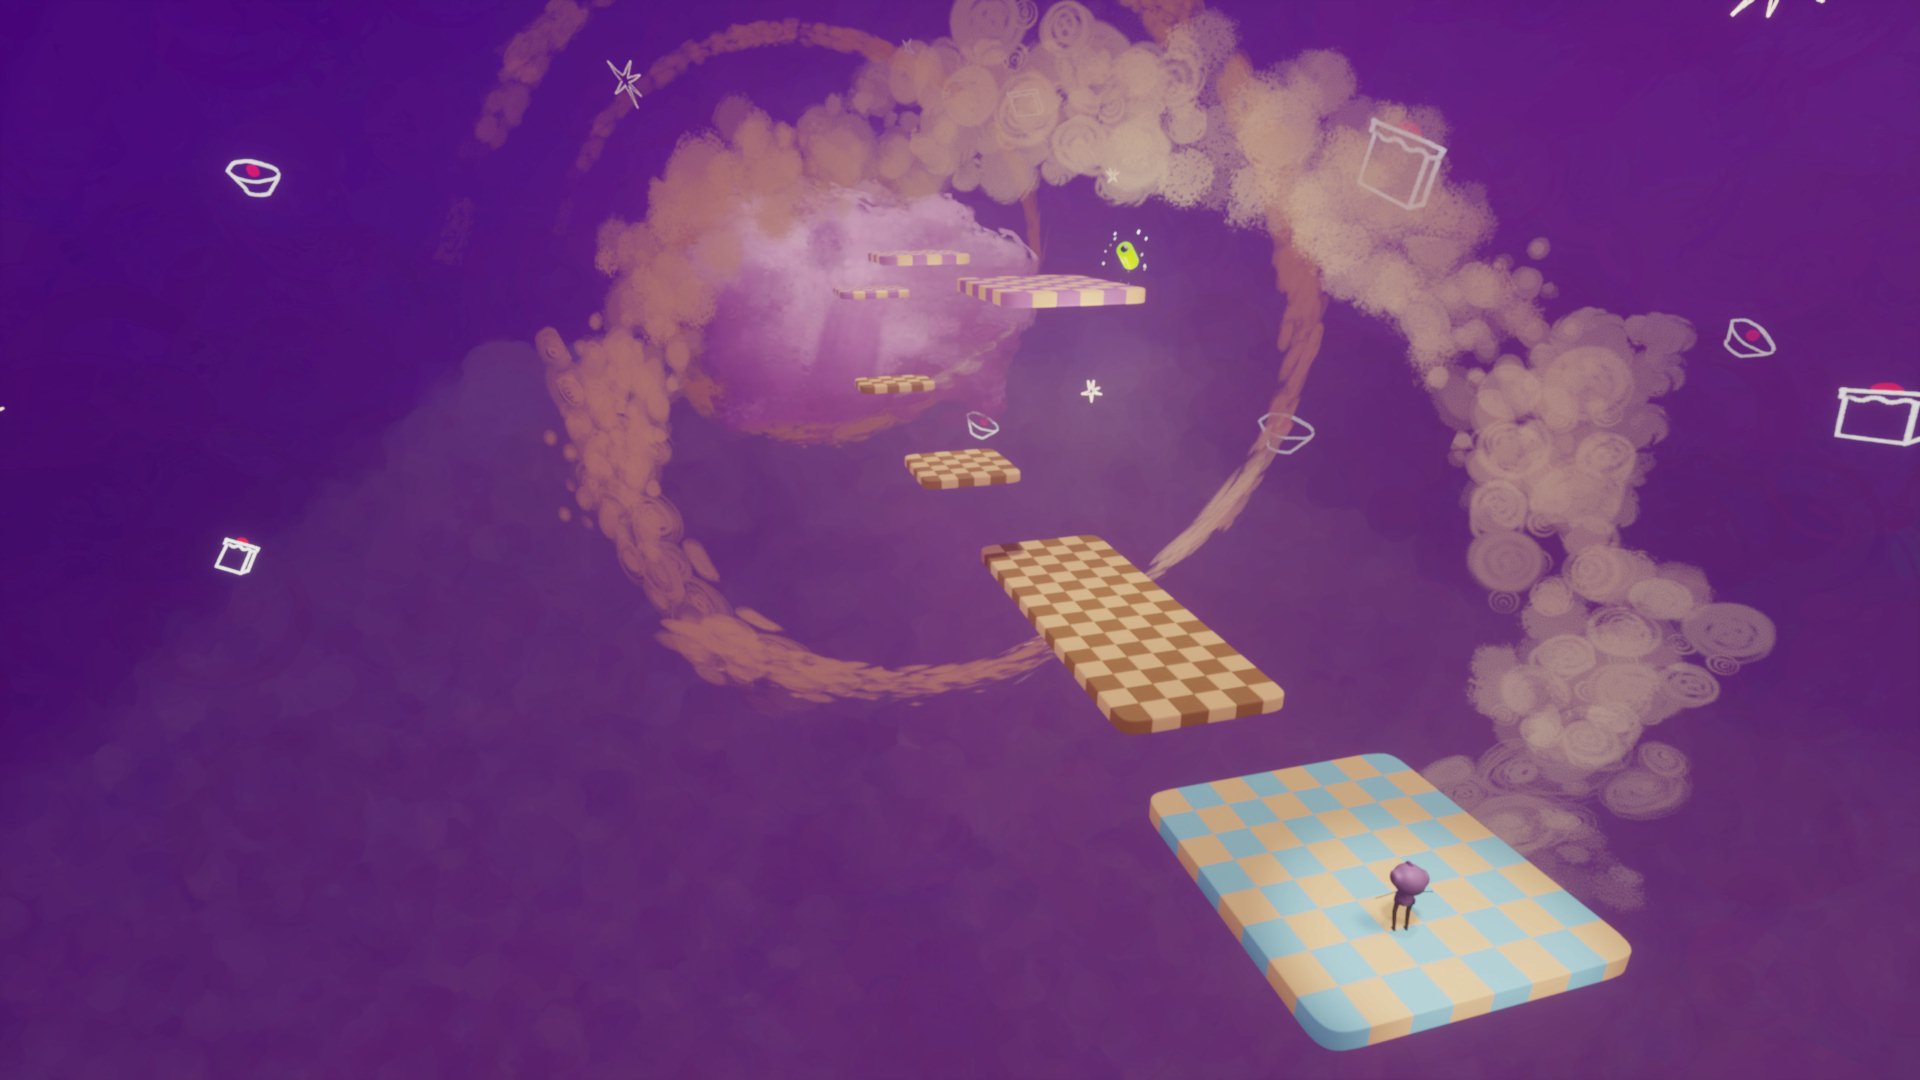 Media Molecule played a game I made in Dreams